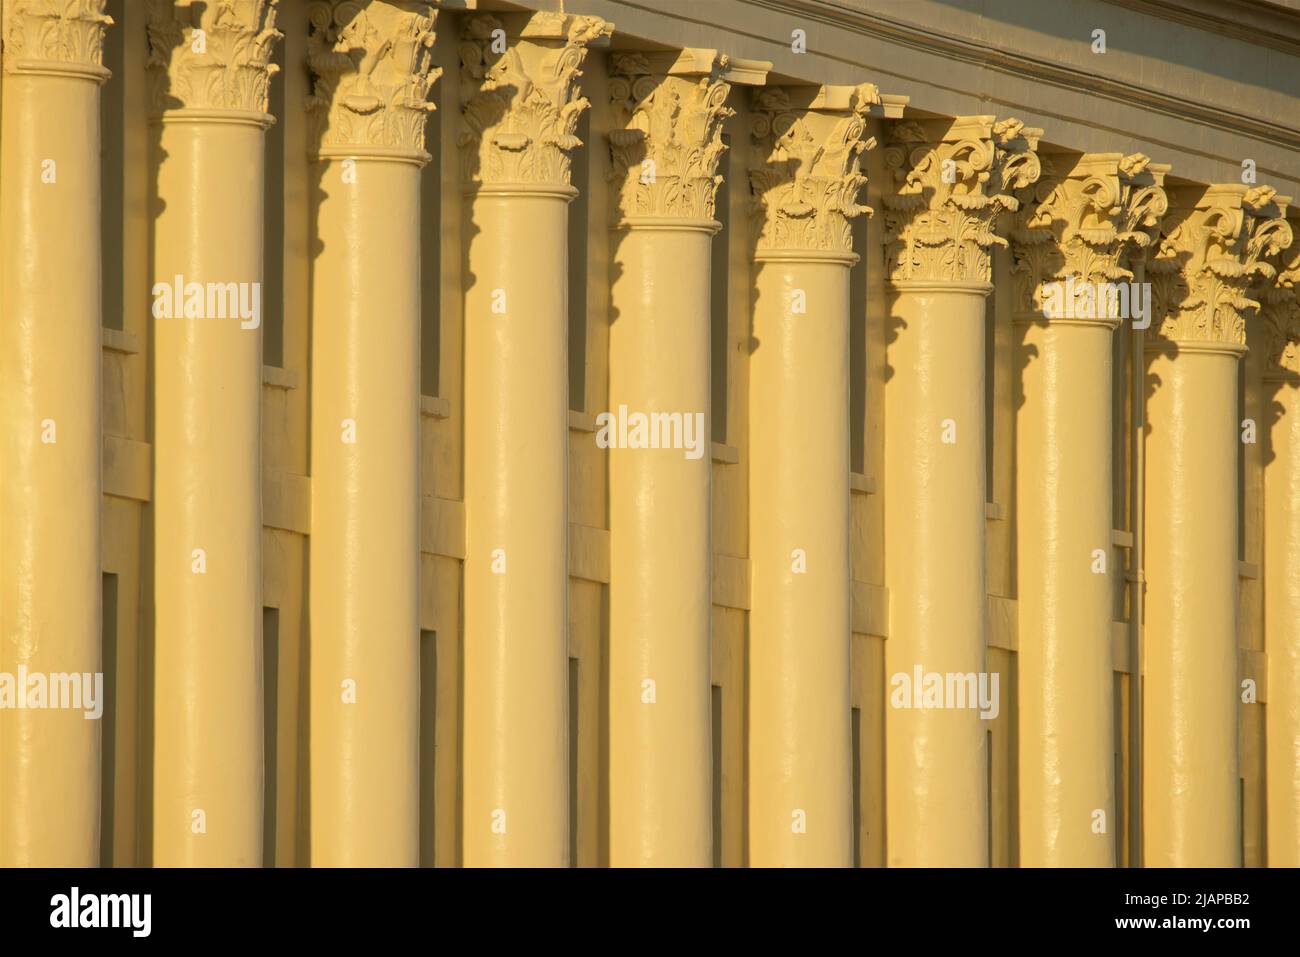 Corinthian columns of Brunswick Terrace, part of a complex of Regency houses in Hove on Brighton and Hove seafront.  East Sussex, England UK Stock Photo